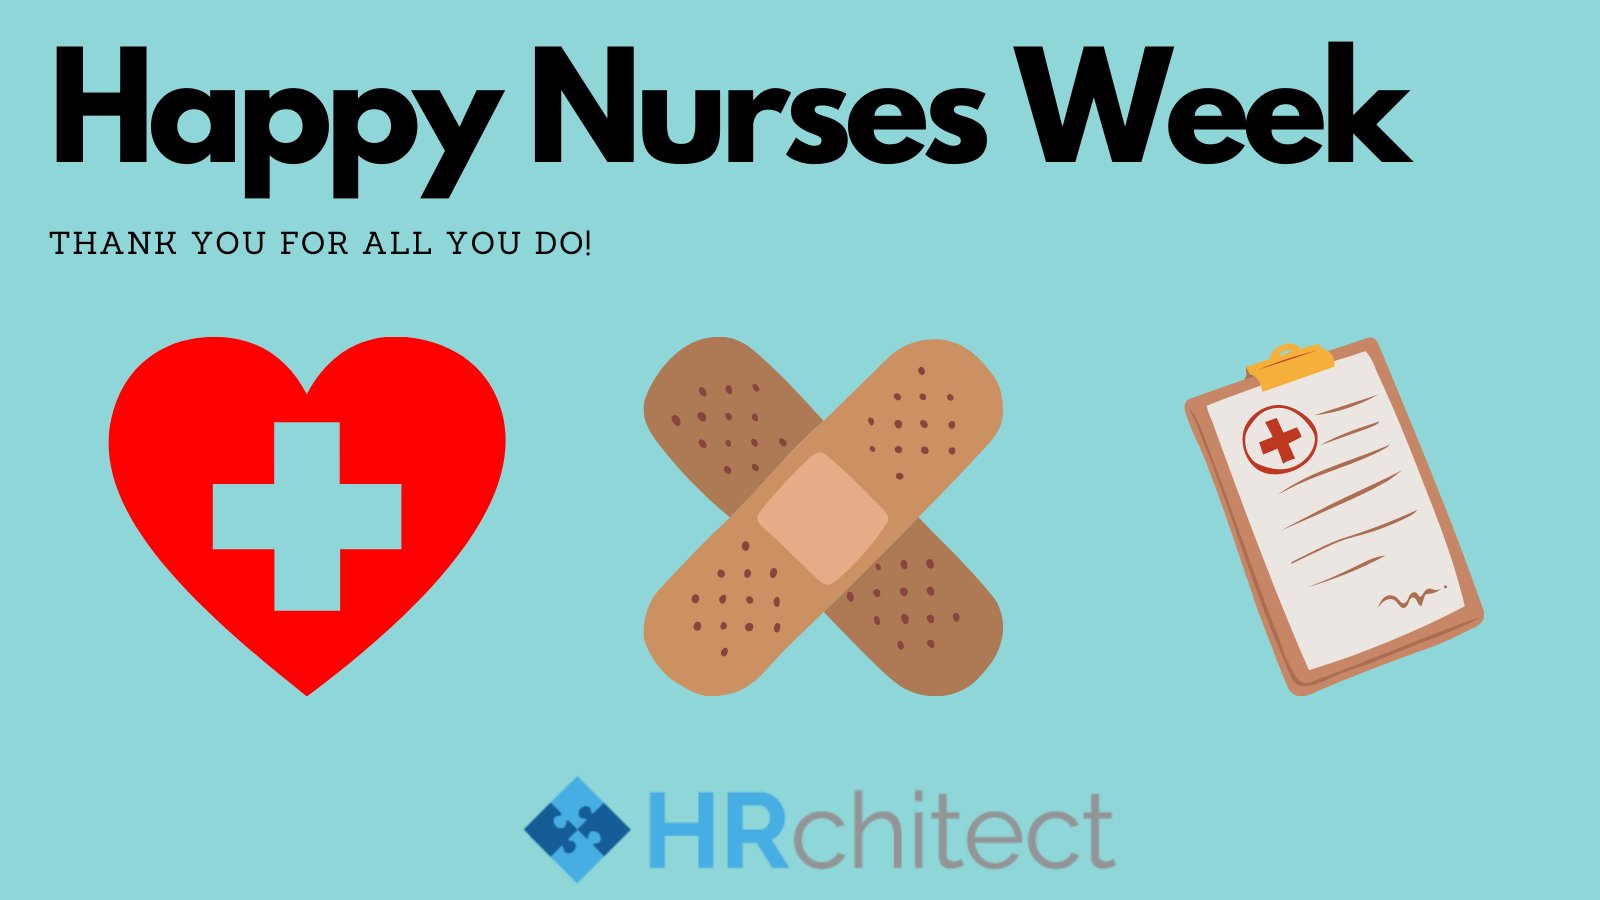 HRchitect National Nurses Week! In honor of your contributions and sacrifices. Thank you! #nurses